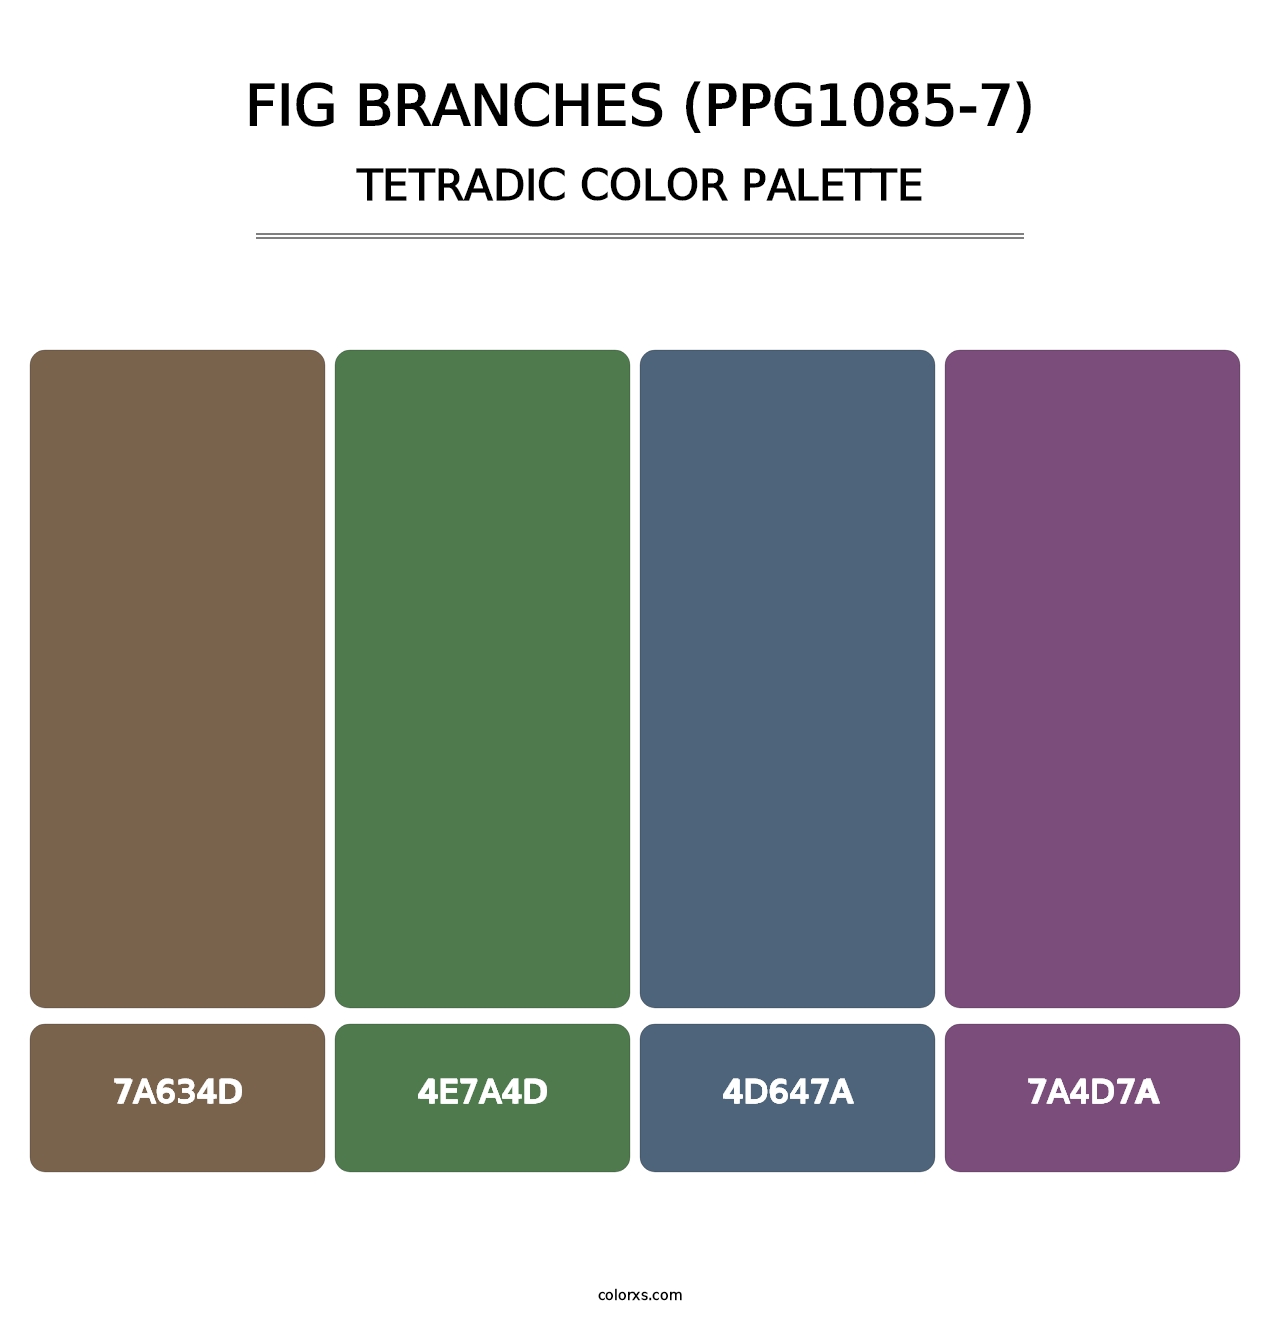 Fig Branches (PPG1085-7) - Tetradic Color Palette